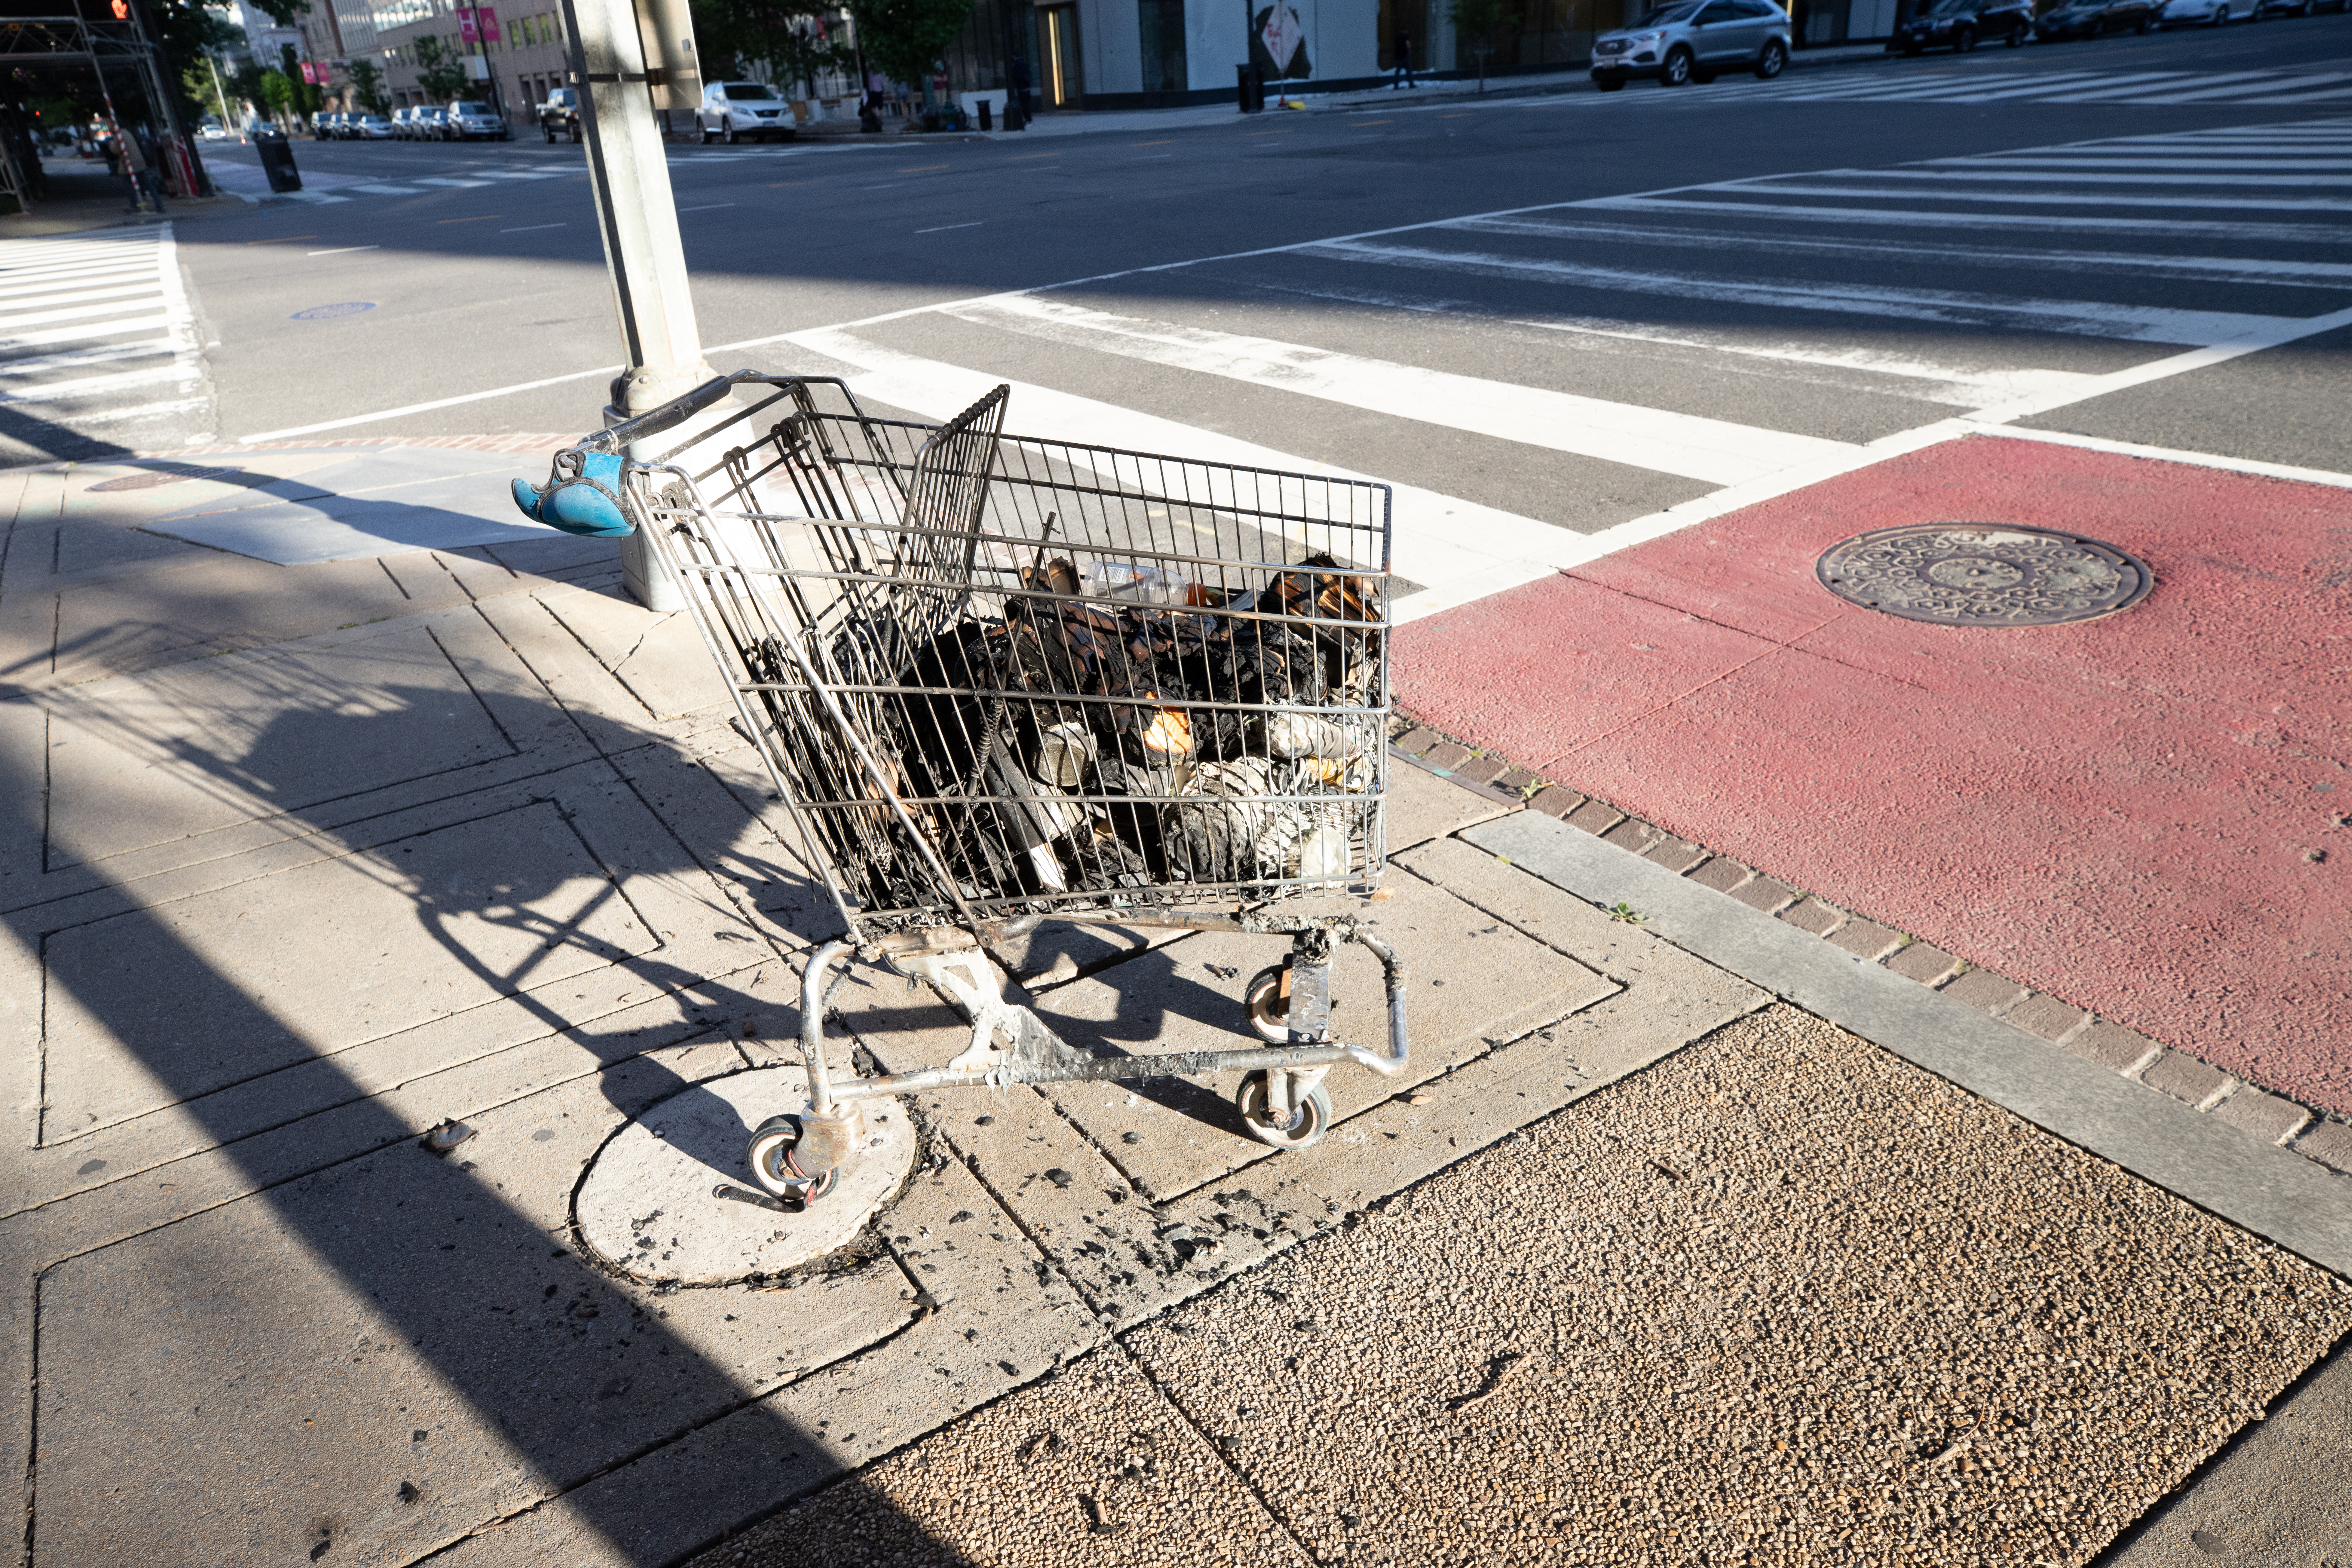 A shopping cart containing the remnants of a fire of of Connecticut Ave. NW and H St. NW. (Photo: Kaylee C. Greenlee for The Daily Caller)